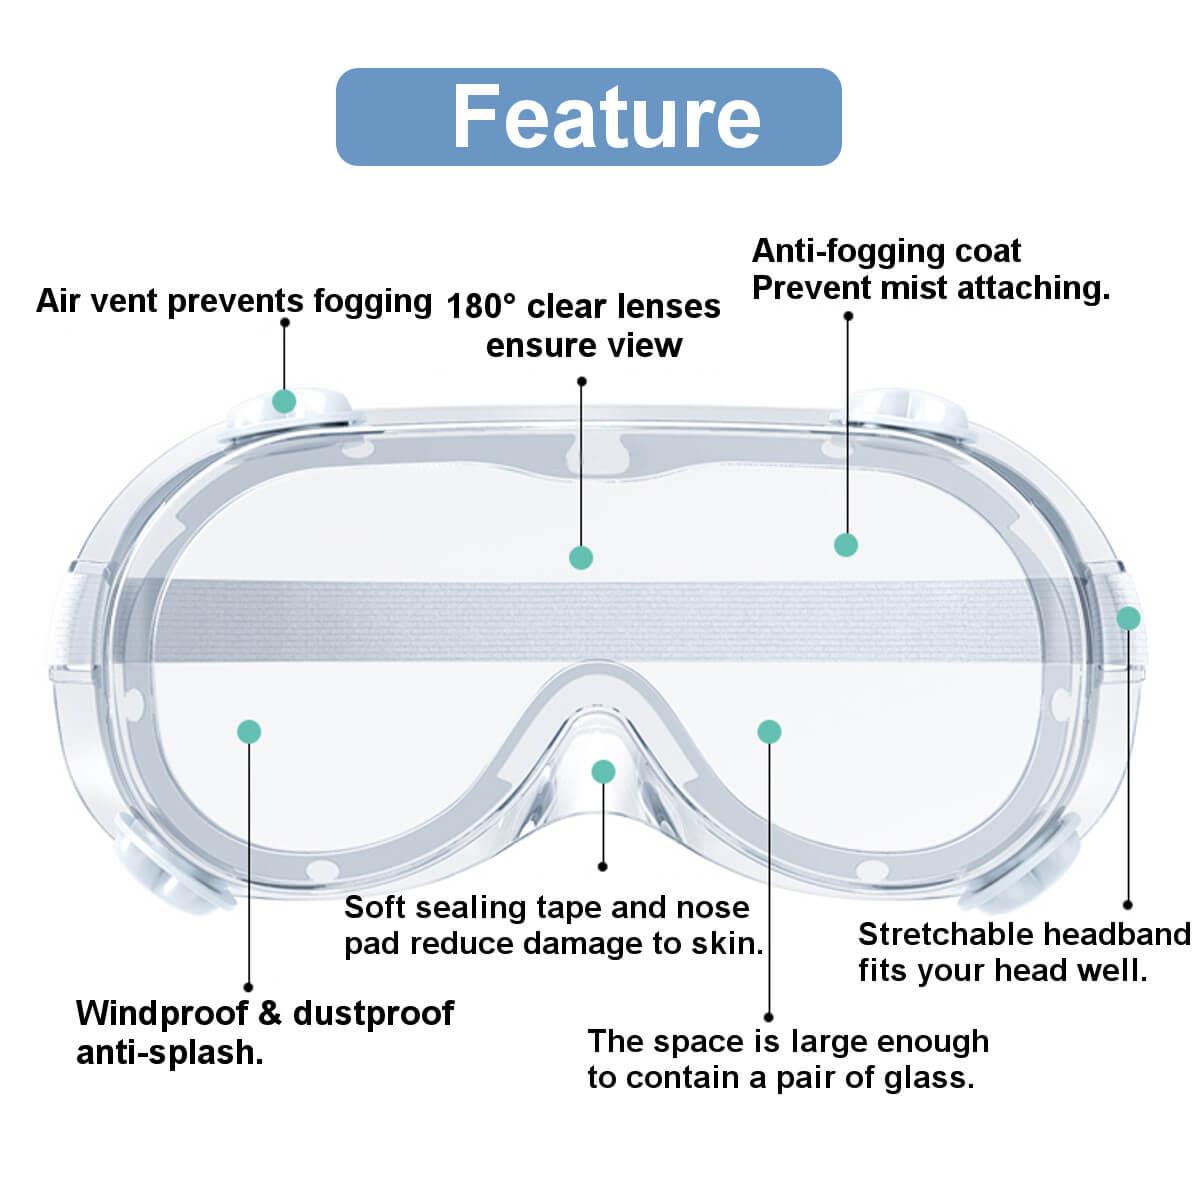 Medical goggles features introduction